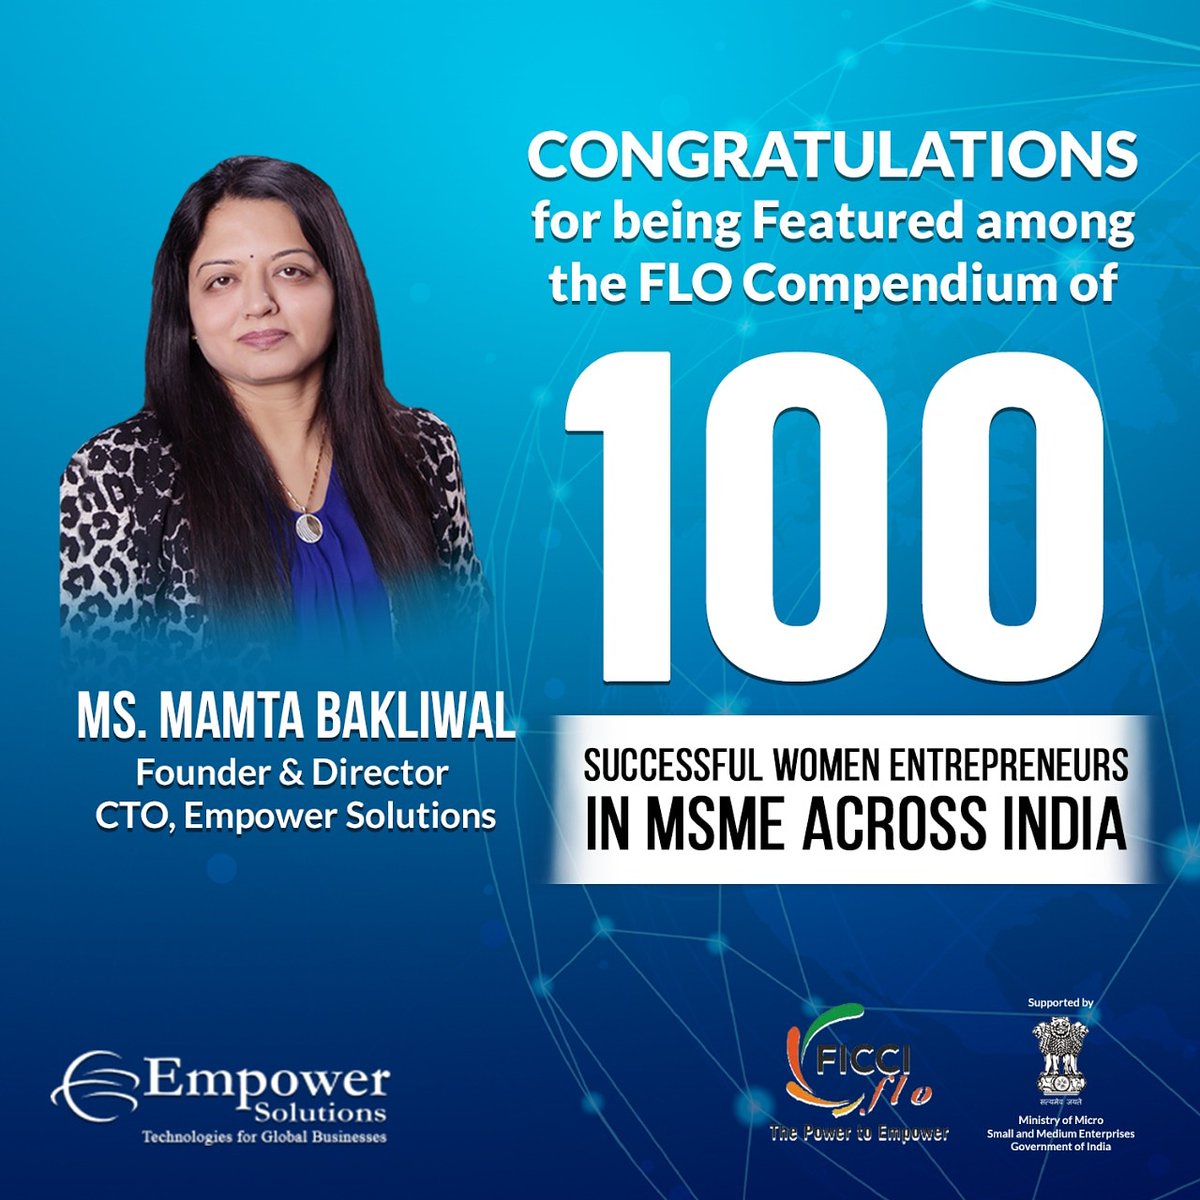 Heartiest congratulation to Ms. Mamta Bakliwal Founder & Director CTO of  #Empowersolutions an STPI registered unit for being featured among the #FLO compendium of 100 successful #womenentrepreneurs in #MSME

@stpiindia @Omkar_Raii @DeveshTyagii @purnmoon @STPINoida #womenintech